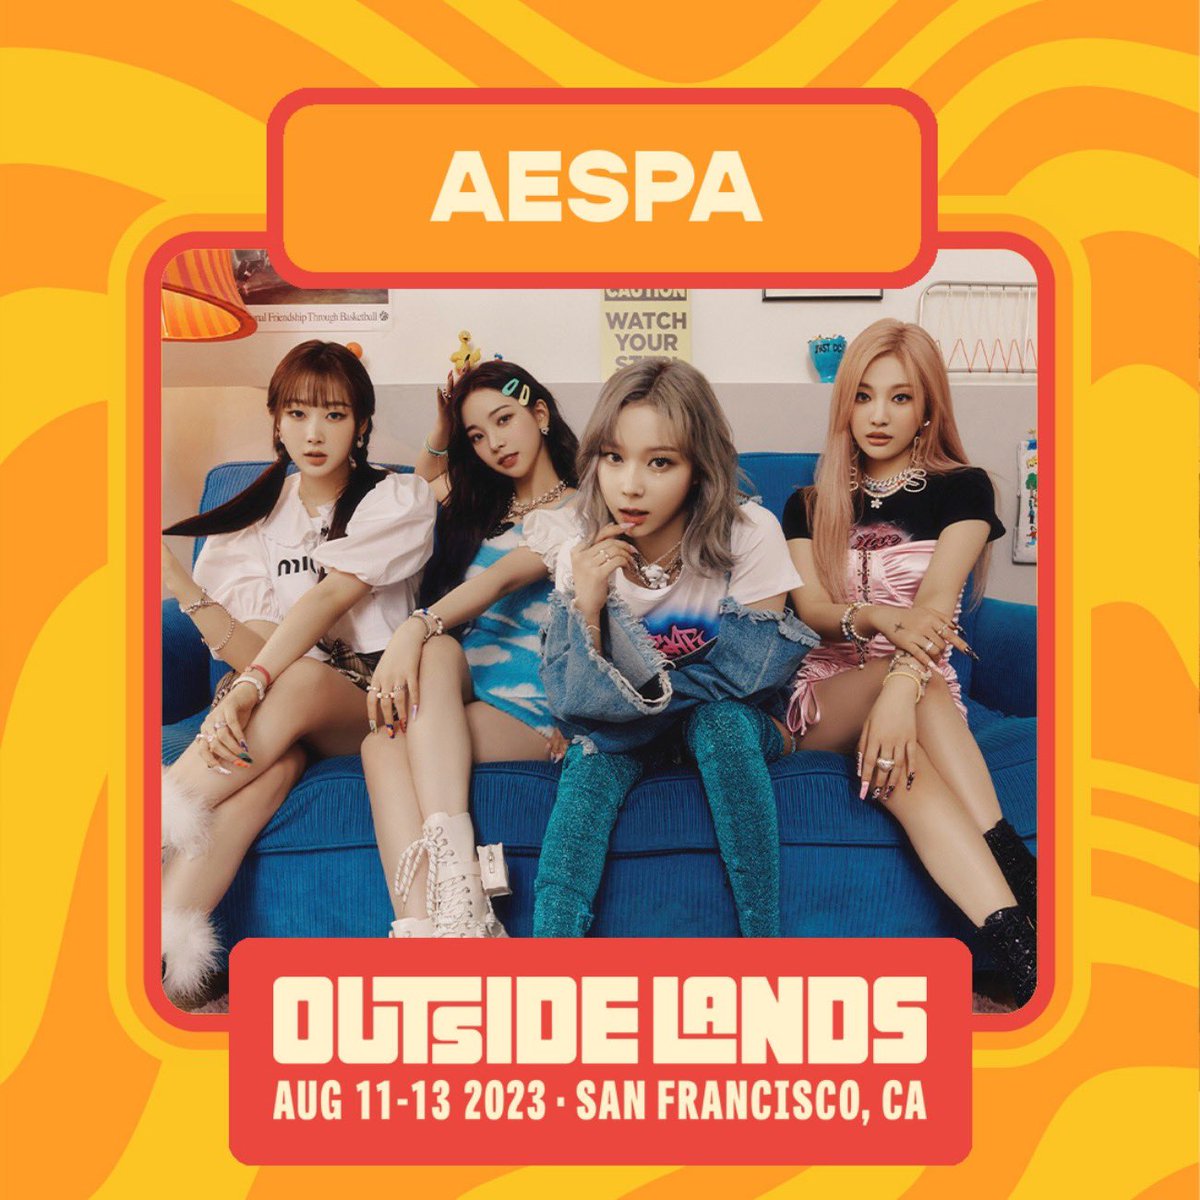 Image for Espa, the first K-pop group to stand on the stage at the US 'Outside Lands Festival'! Shoulder to shoulder with Kendrick Lamar, Odeja and Lana Del Rey! Global move ing! https://t.co/eJRdrWkn4S aespa æspa aespa outsidelands https://t.co/nKhQfmFnYL